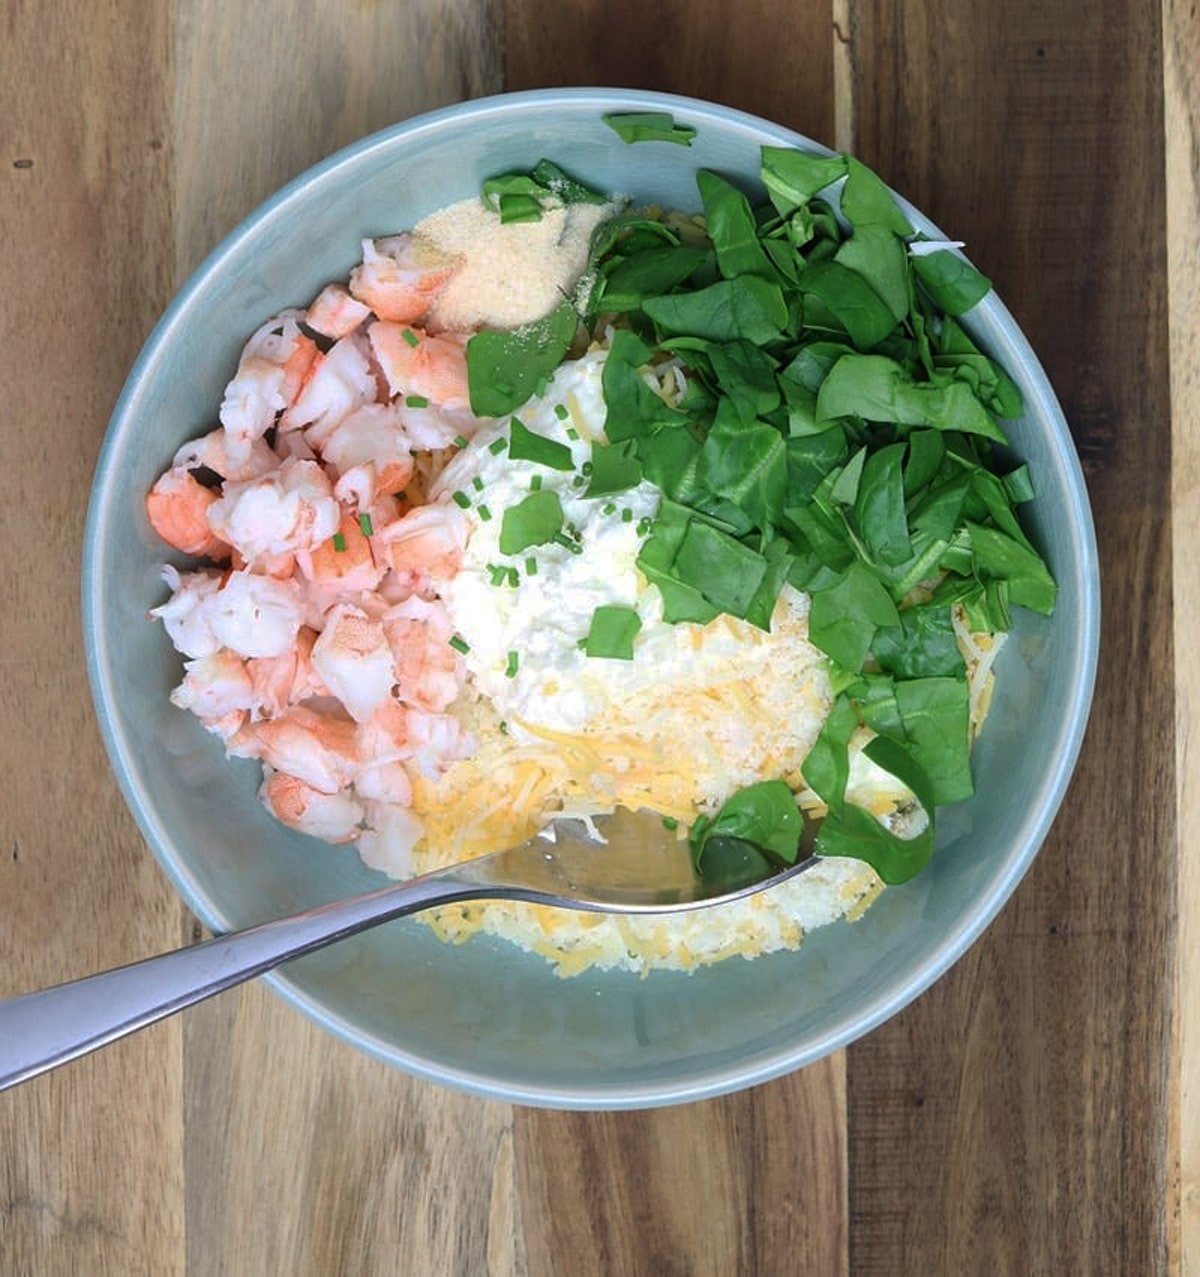 Shrimp stuffed ingredients in a bowl.